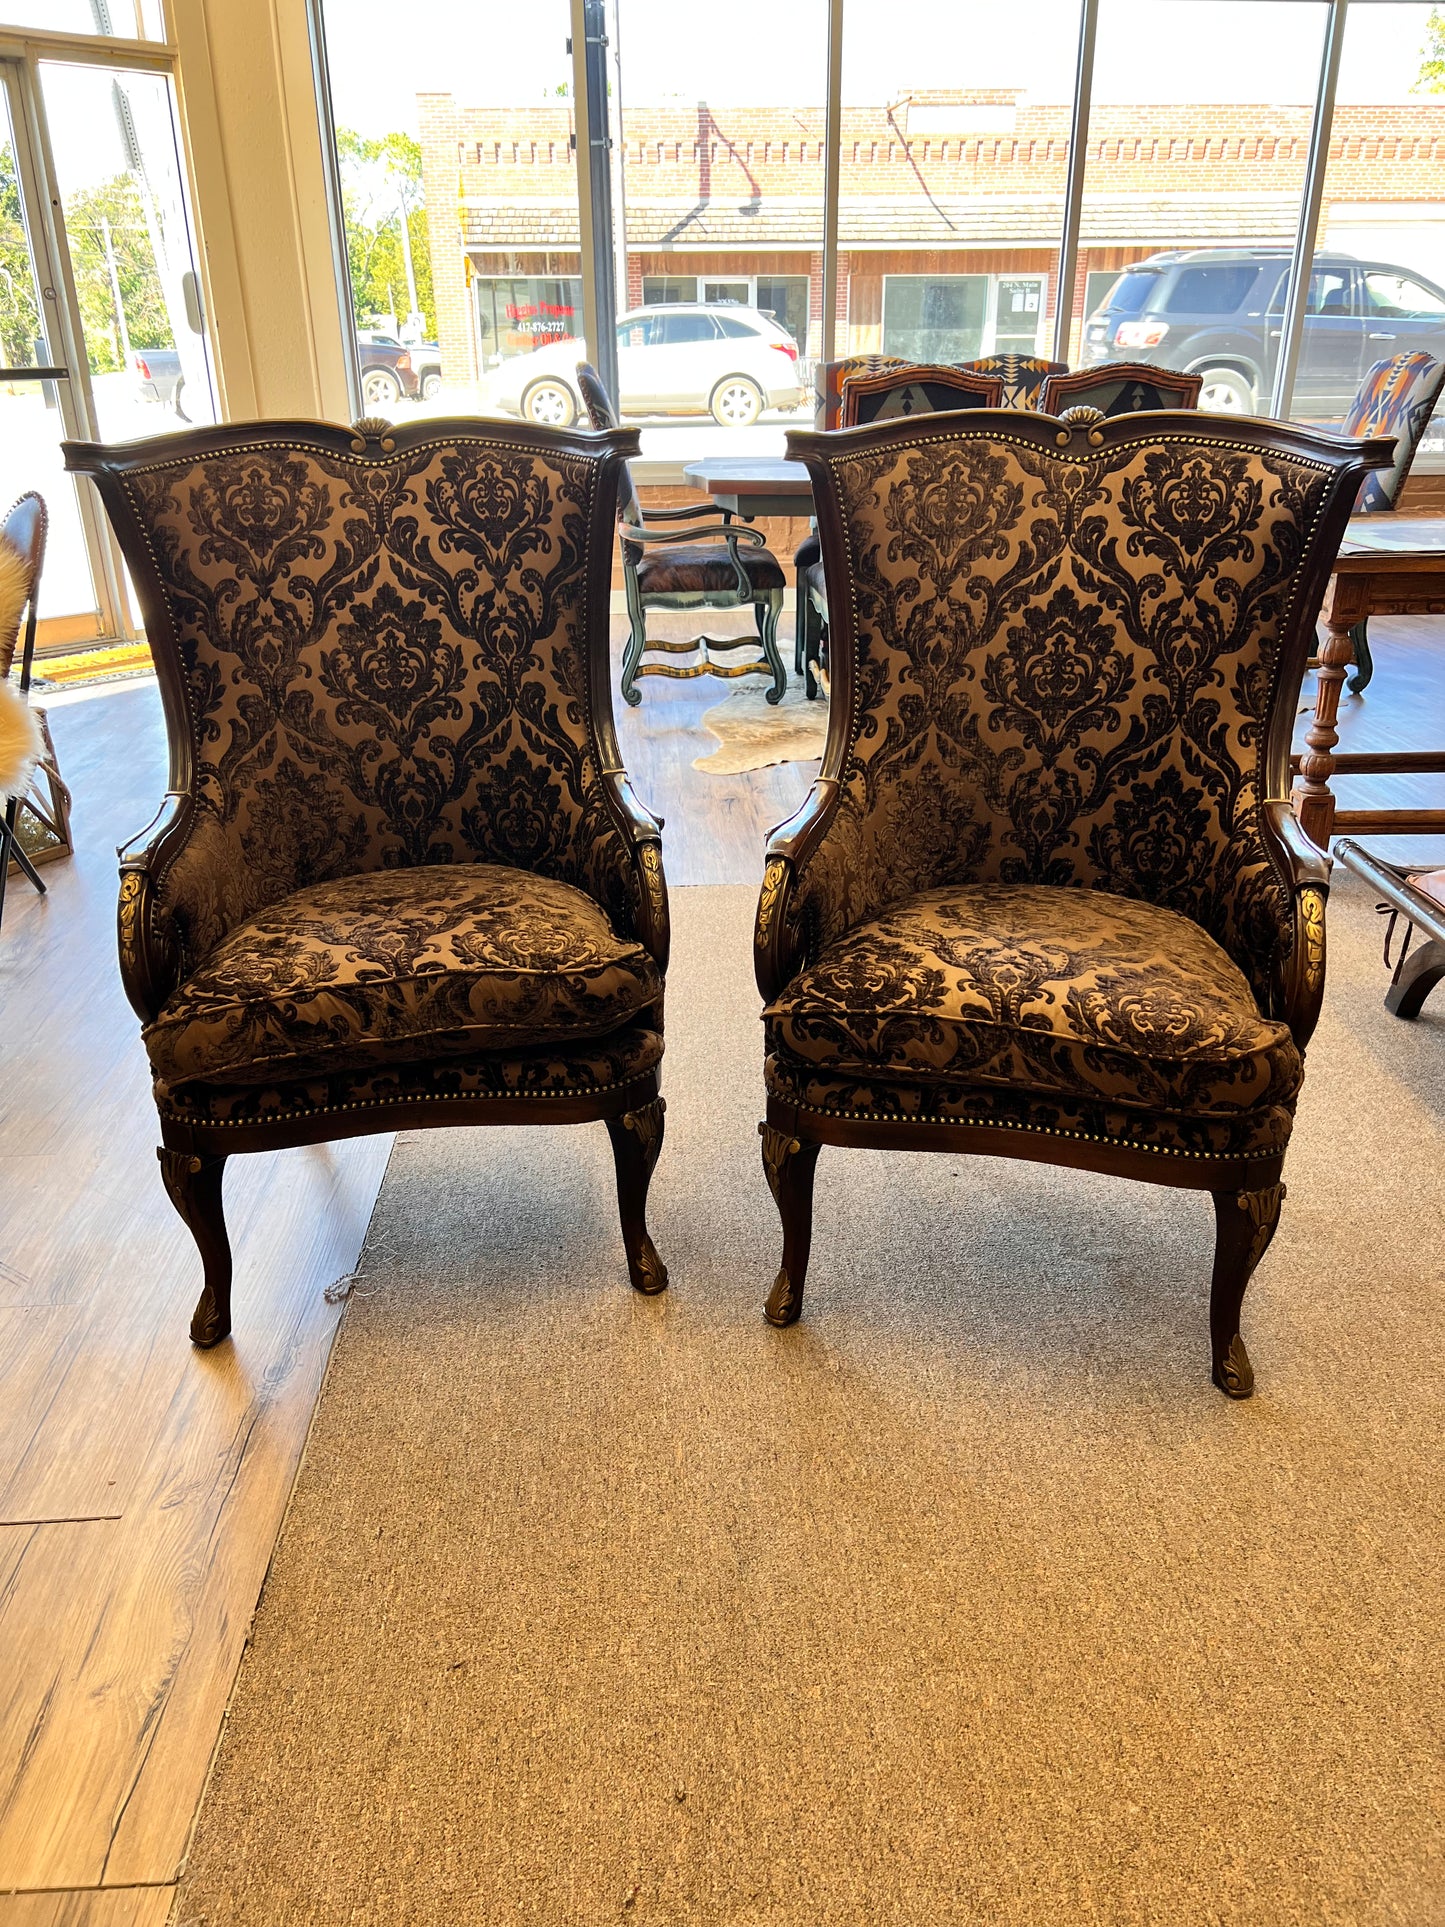 Badlands Large Wrap Chairs (2)